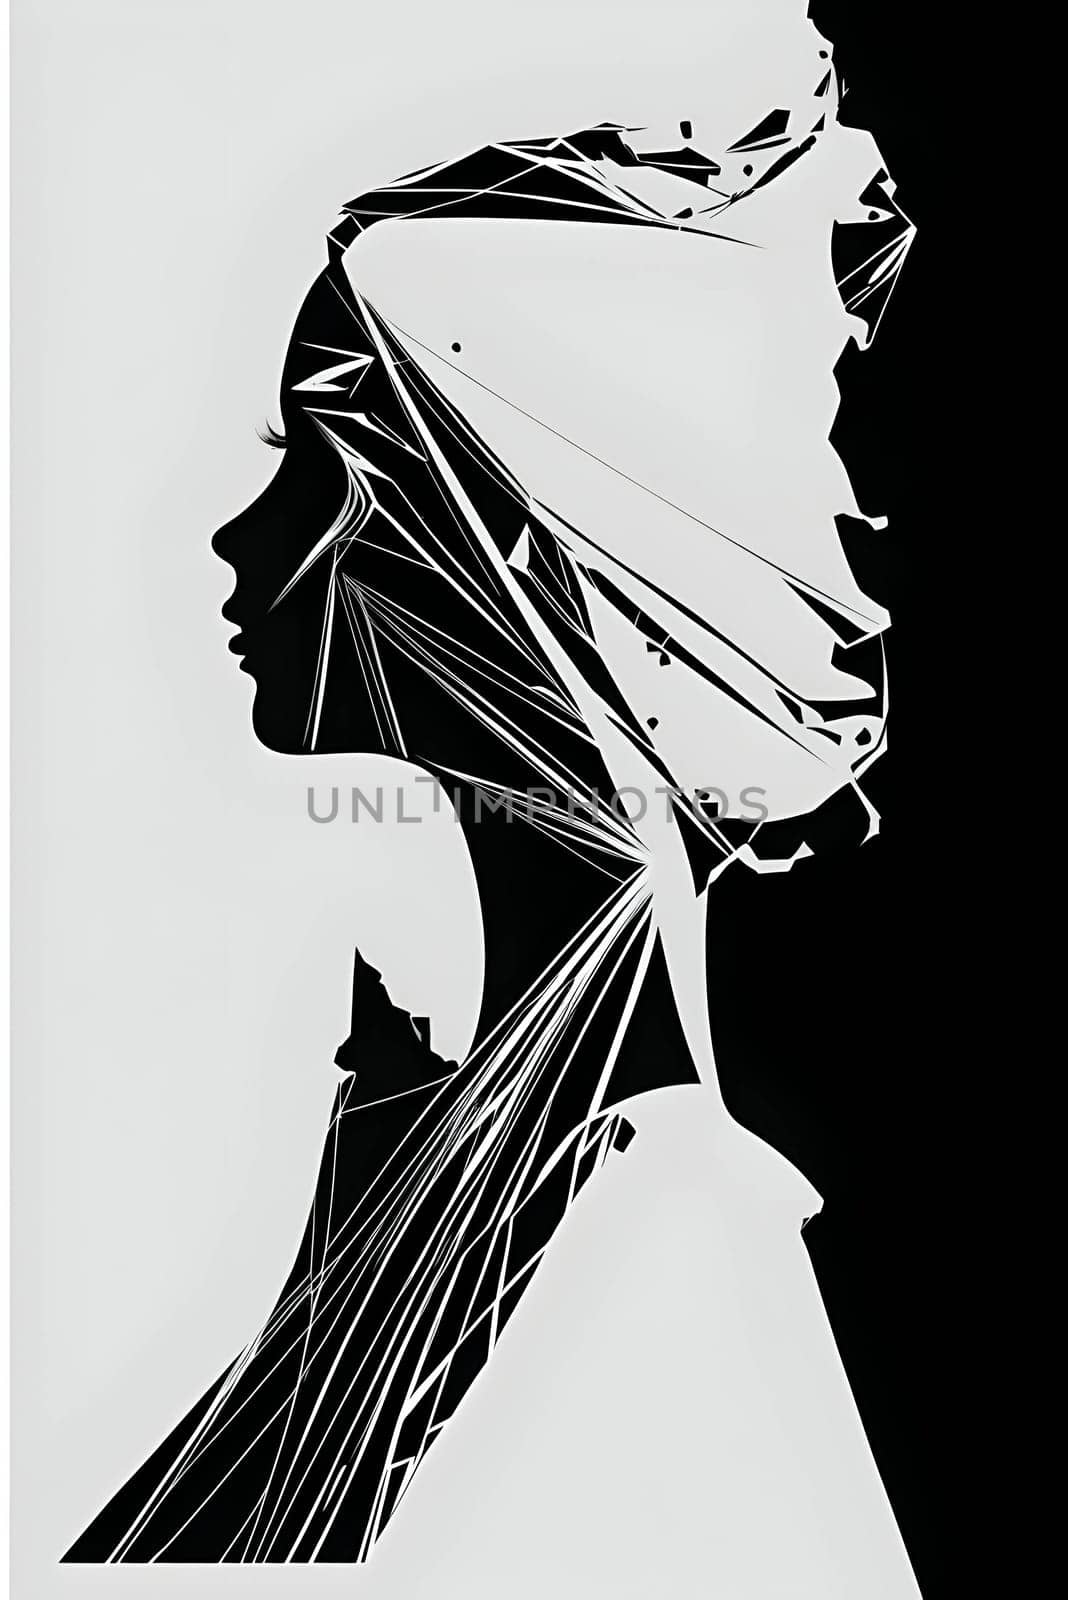 Vector illustration of a woman portrait in black silhouette against a clean white background, capturing graceful forms.